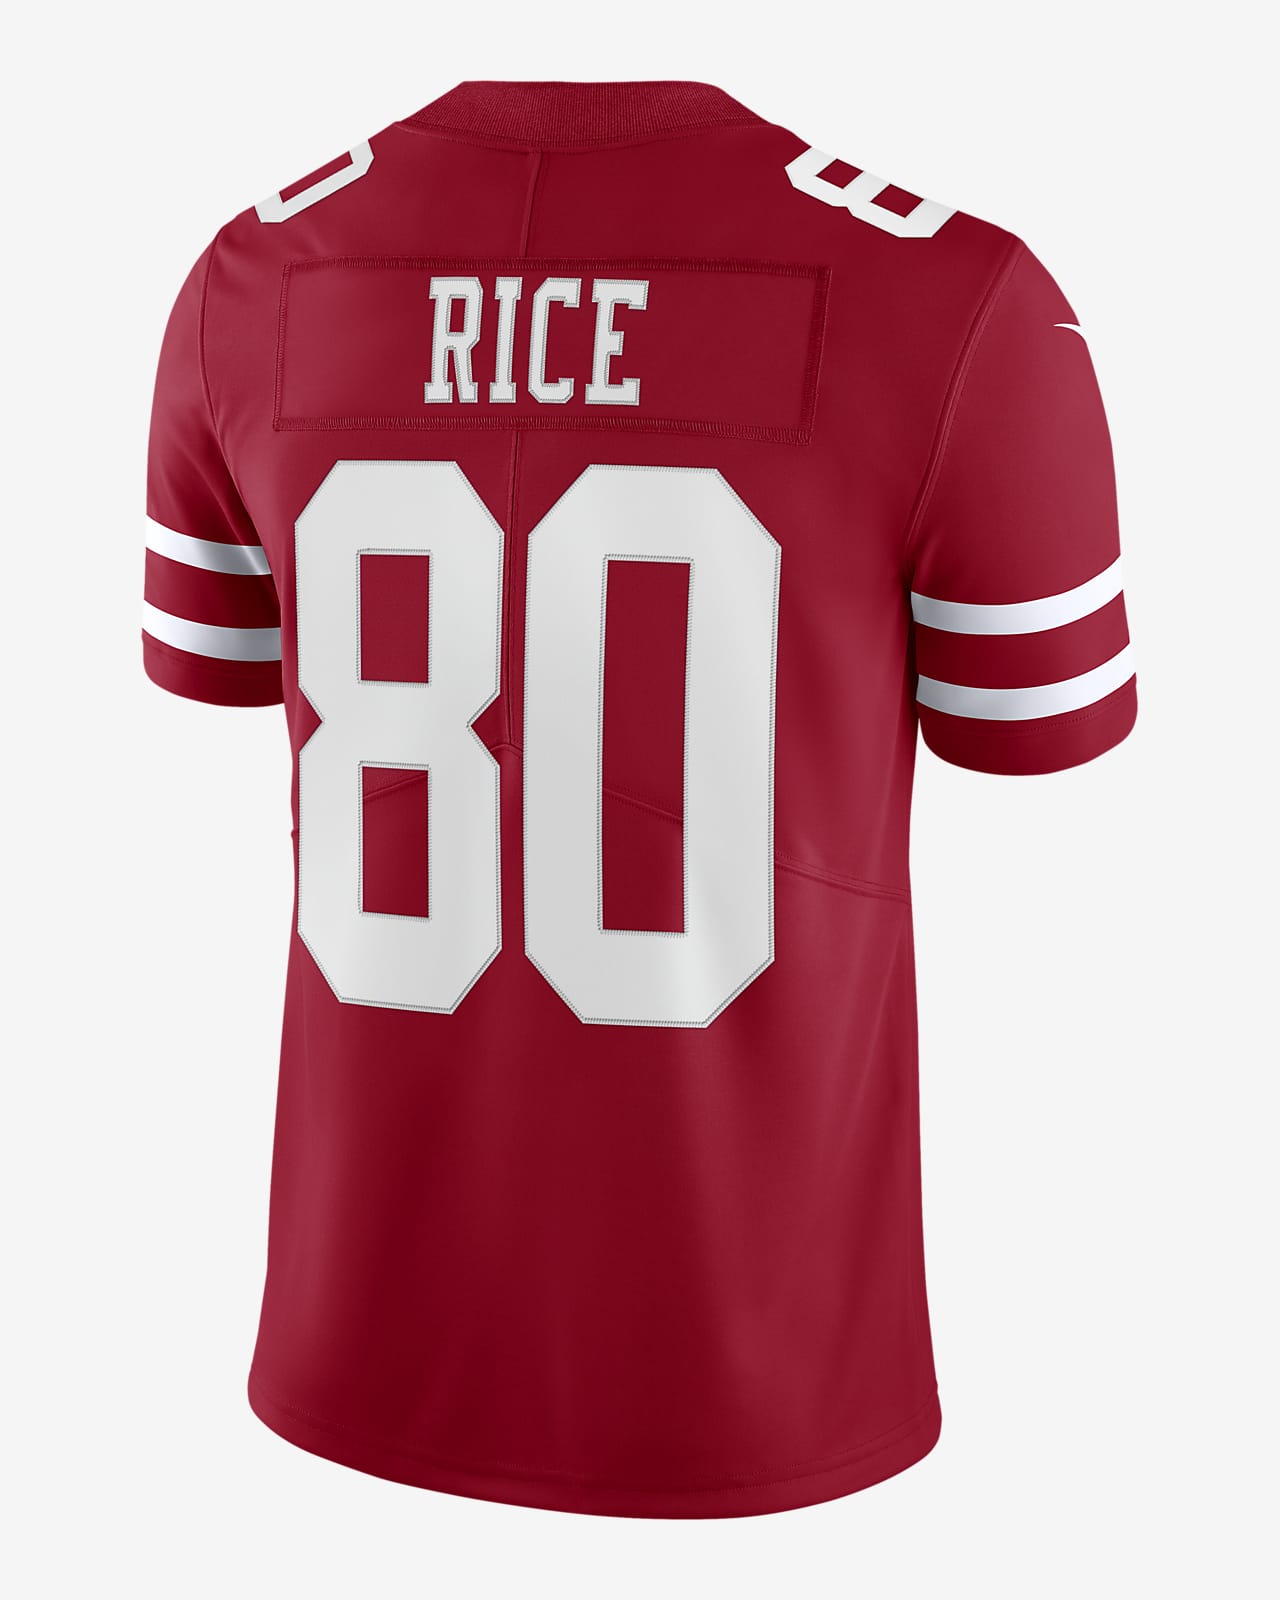 49ers jersey official